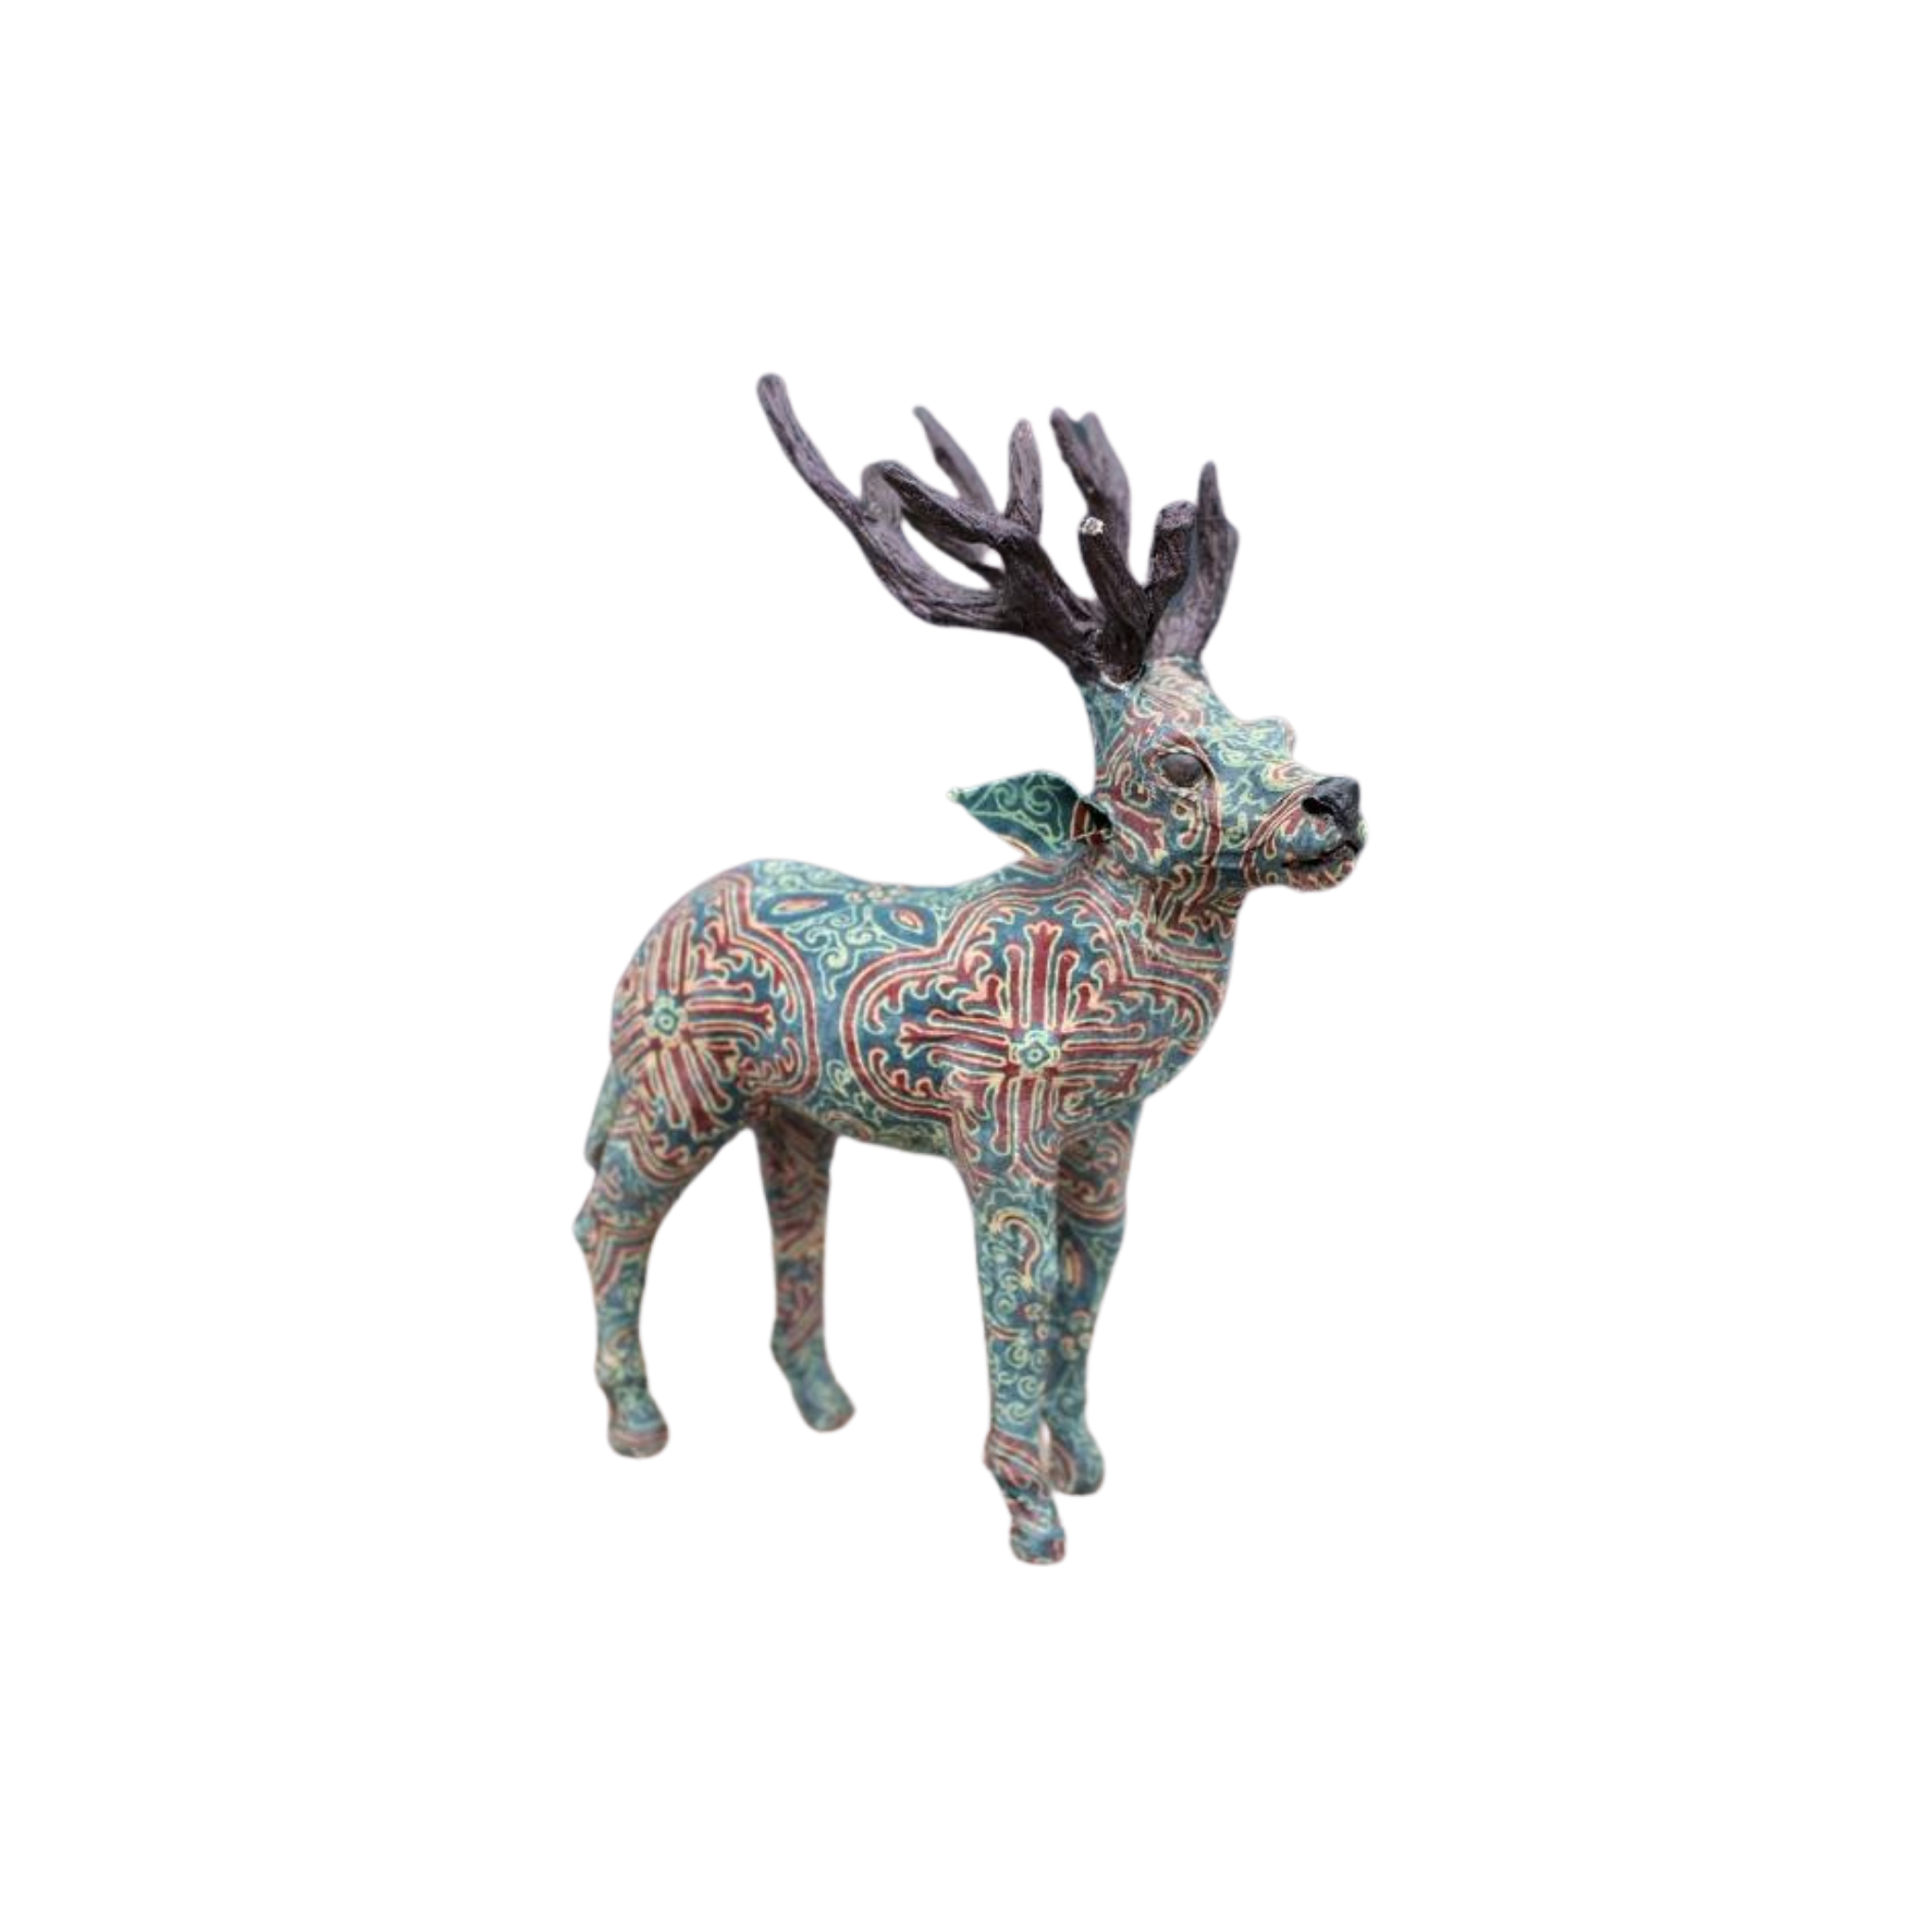 Reindeer Paper Mache Side View With red and green patterned bodies